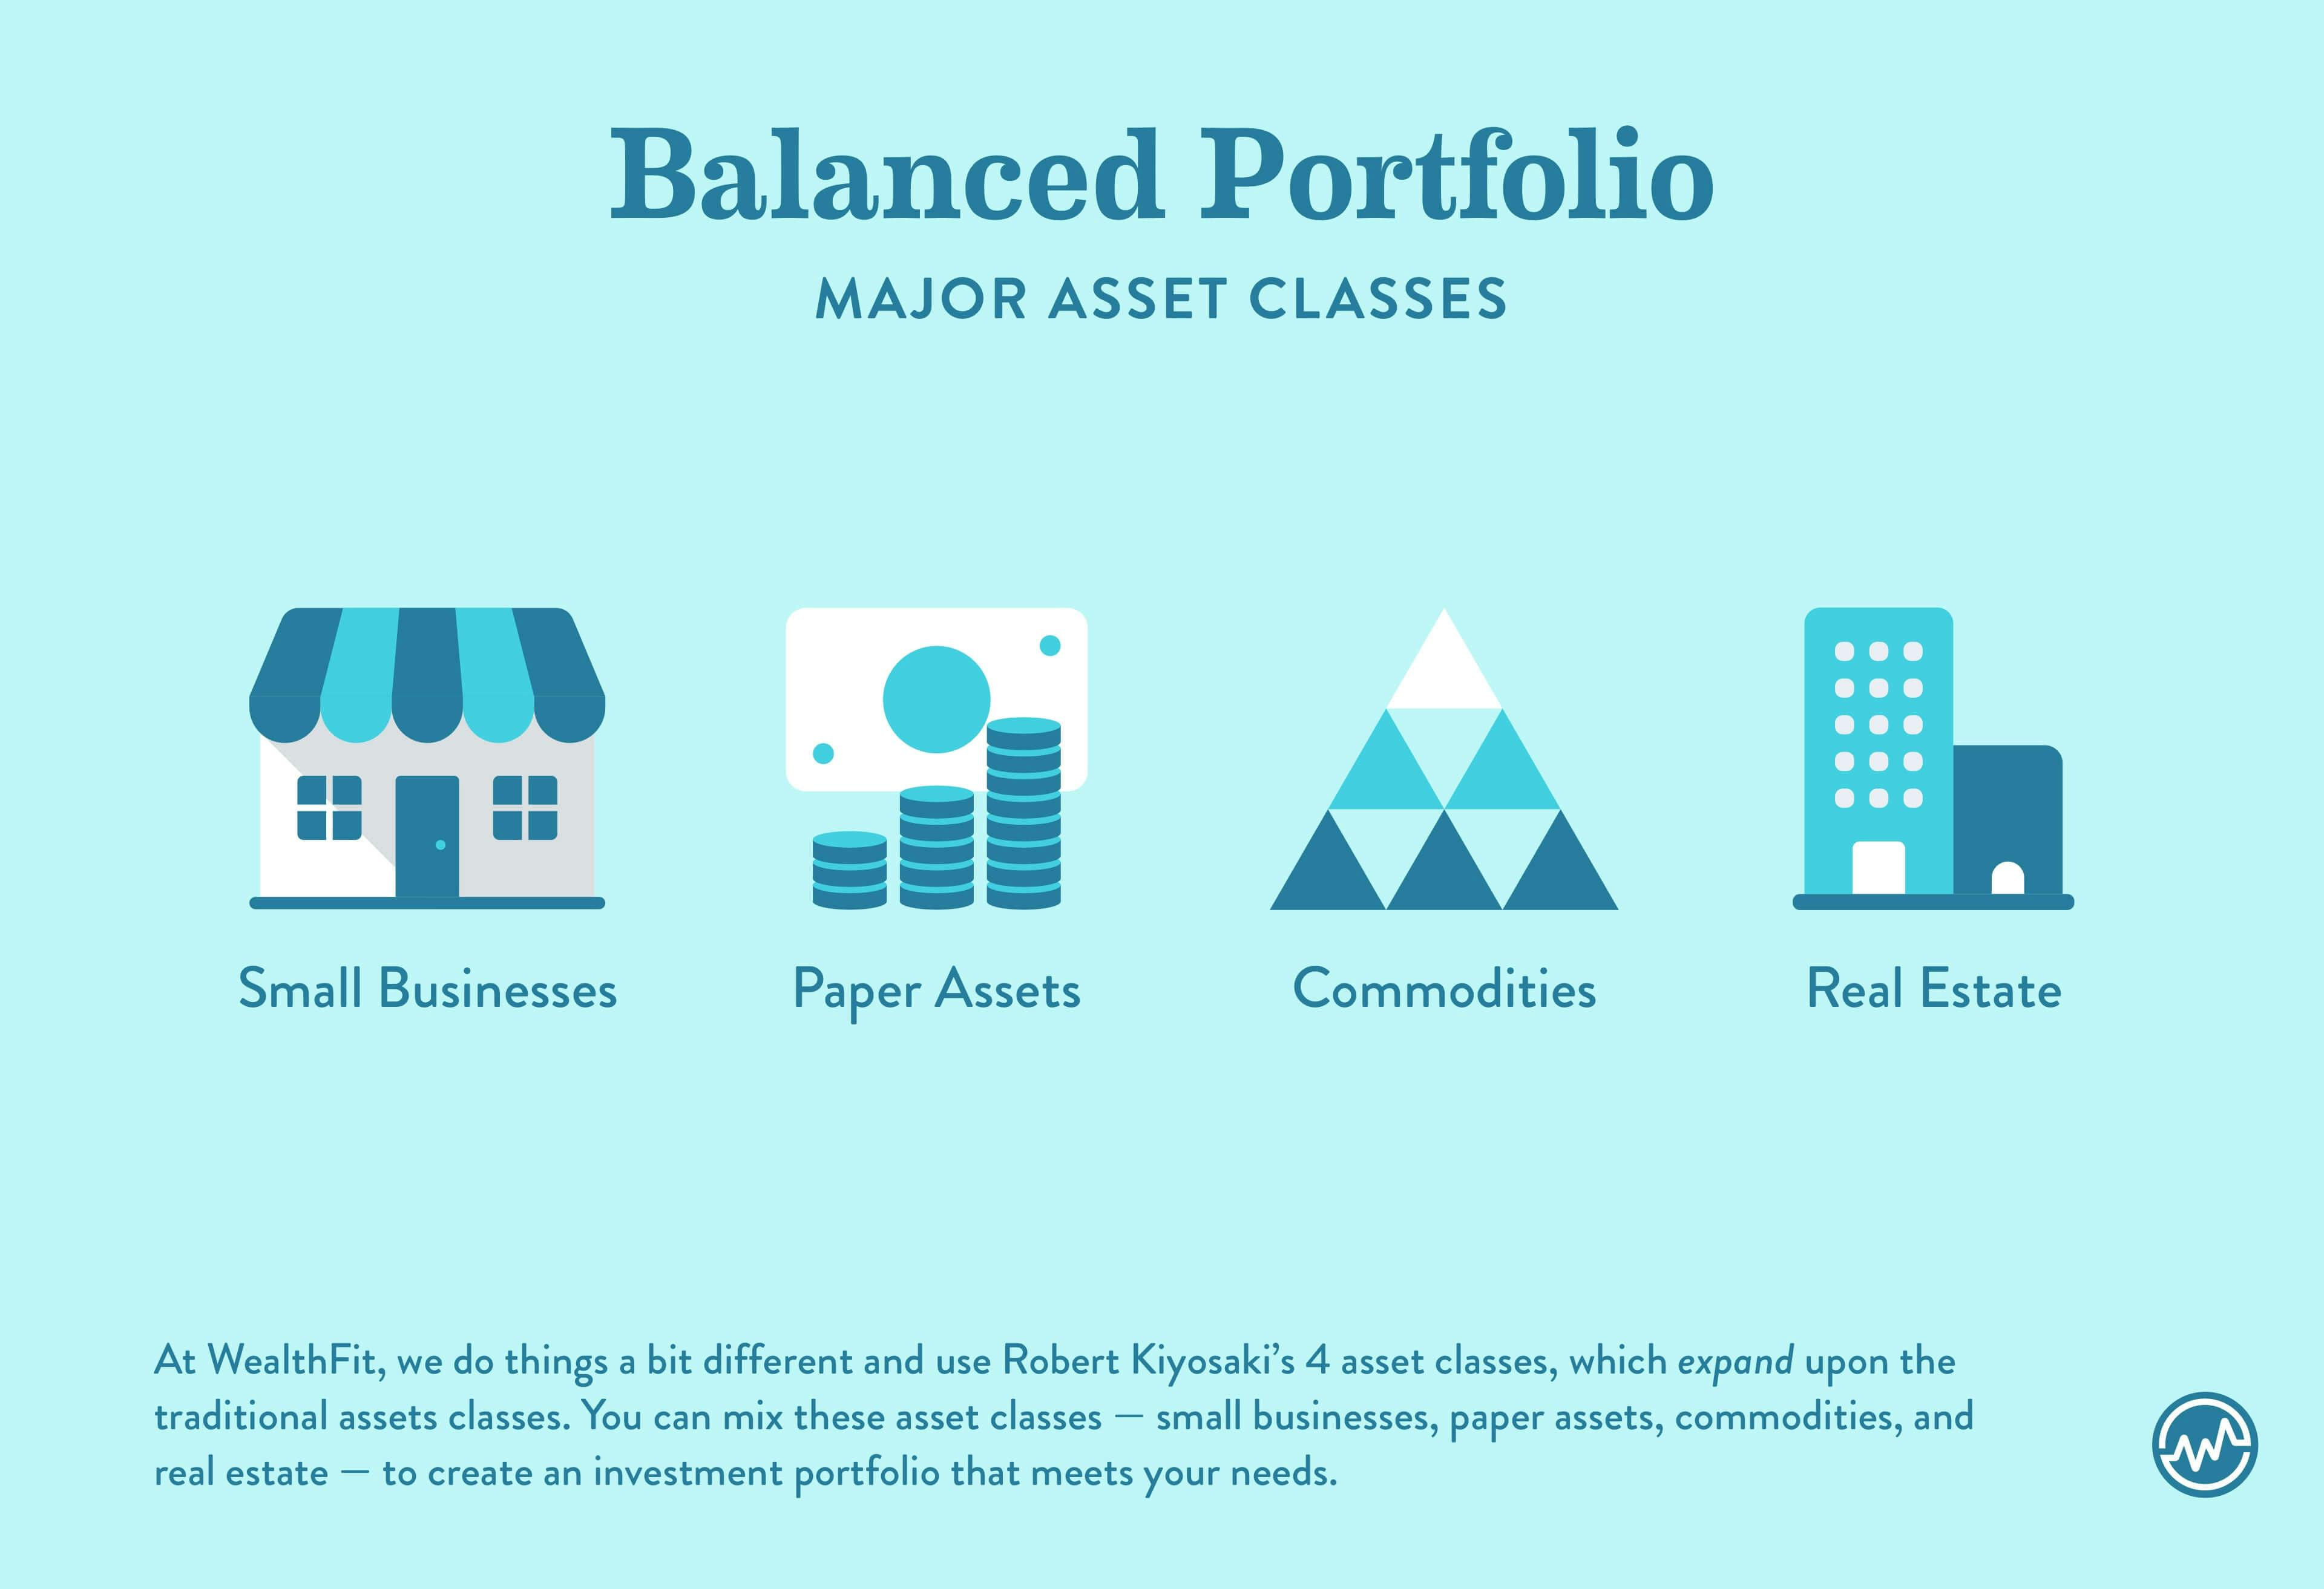 How To Balance Your Portfolio — Using Businesses, Commodities, Paper